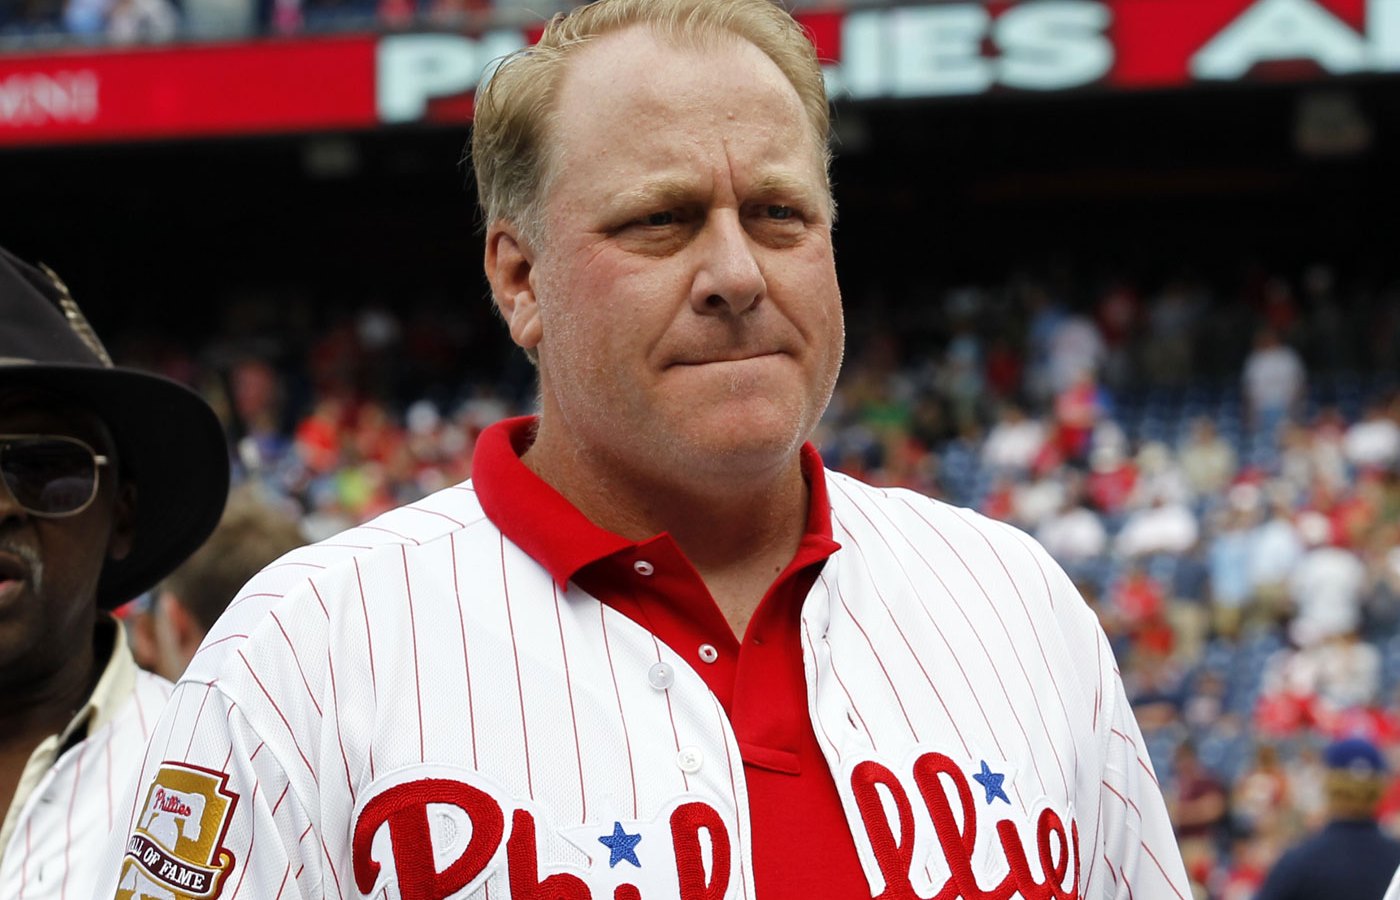 Curt Schilling went "dadmode" when guys started harassing his daughter